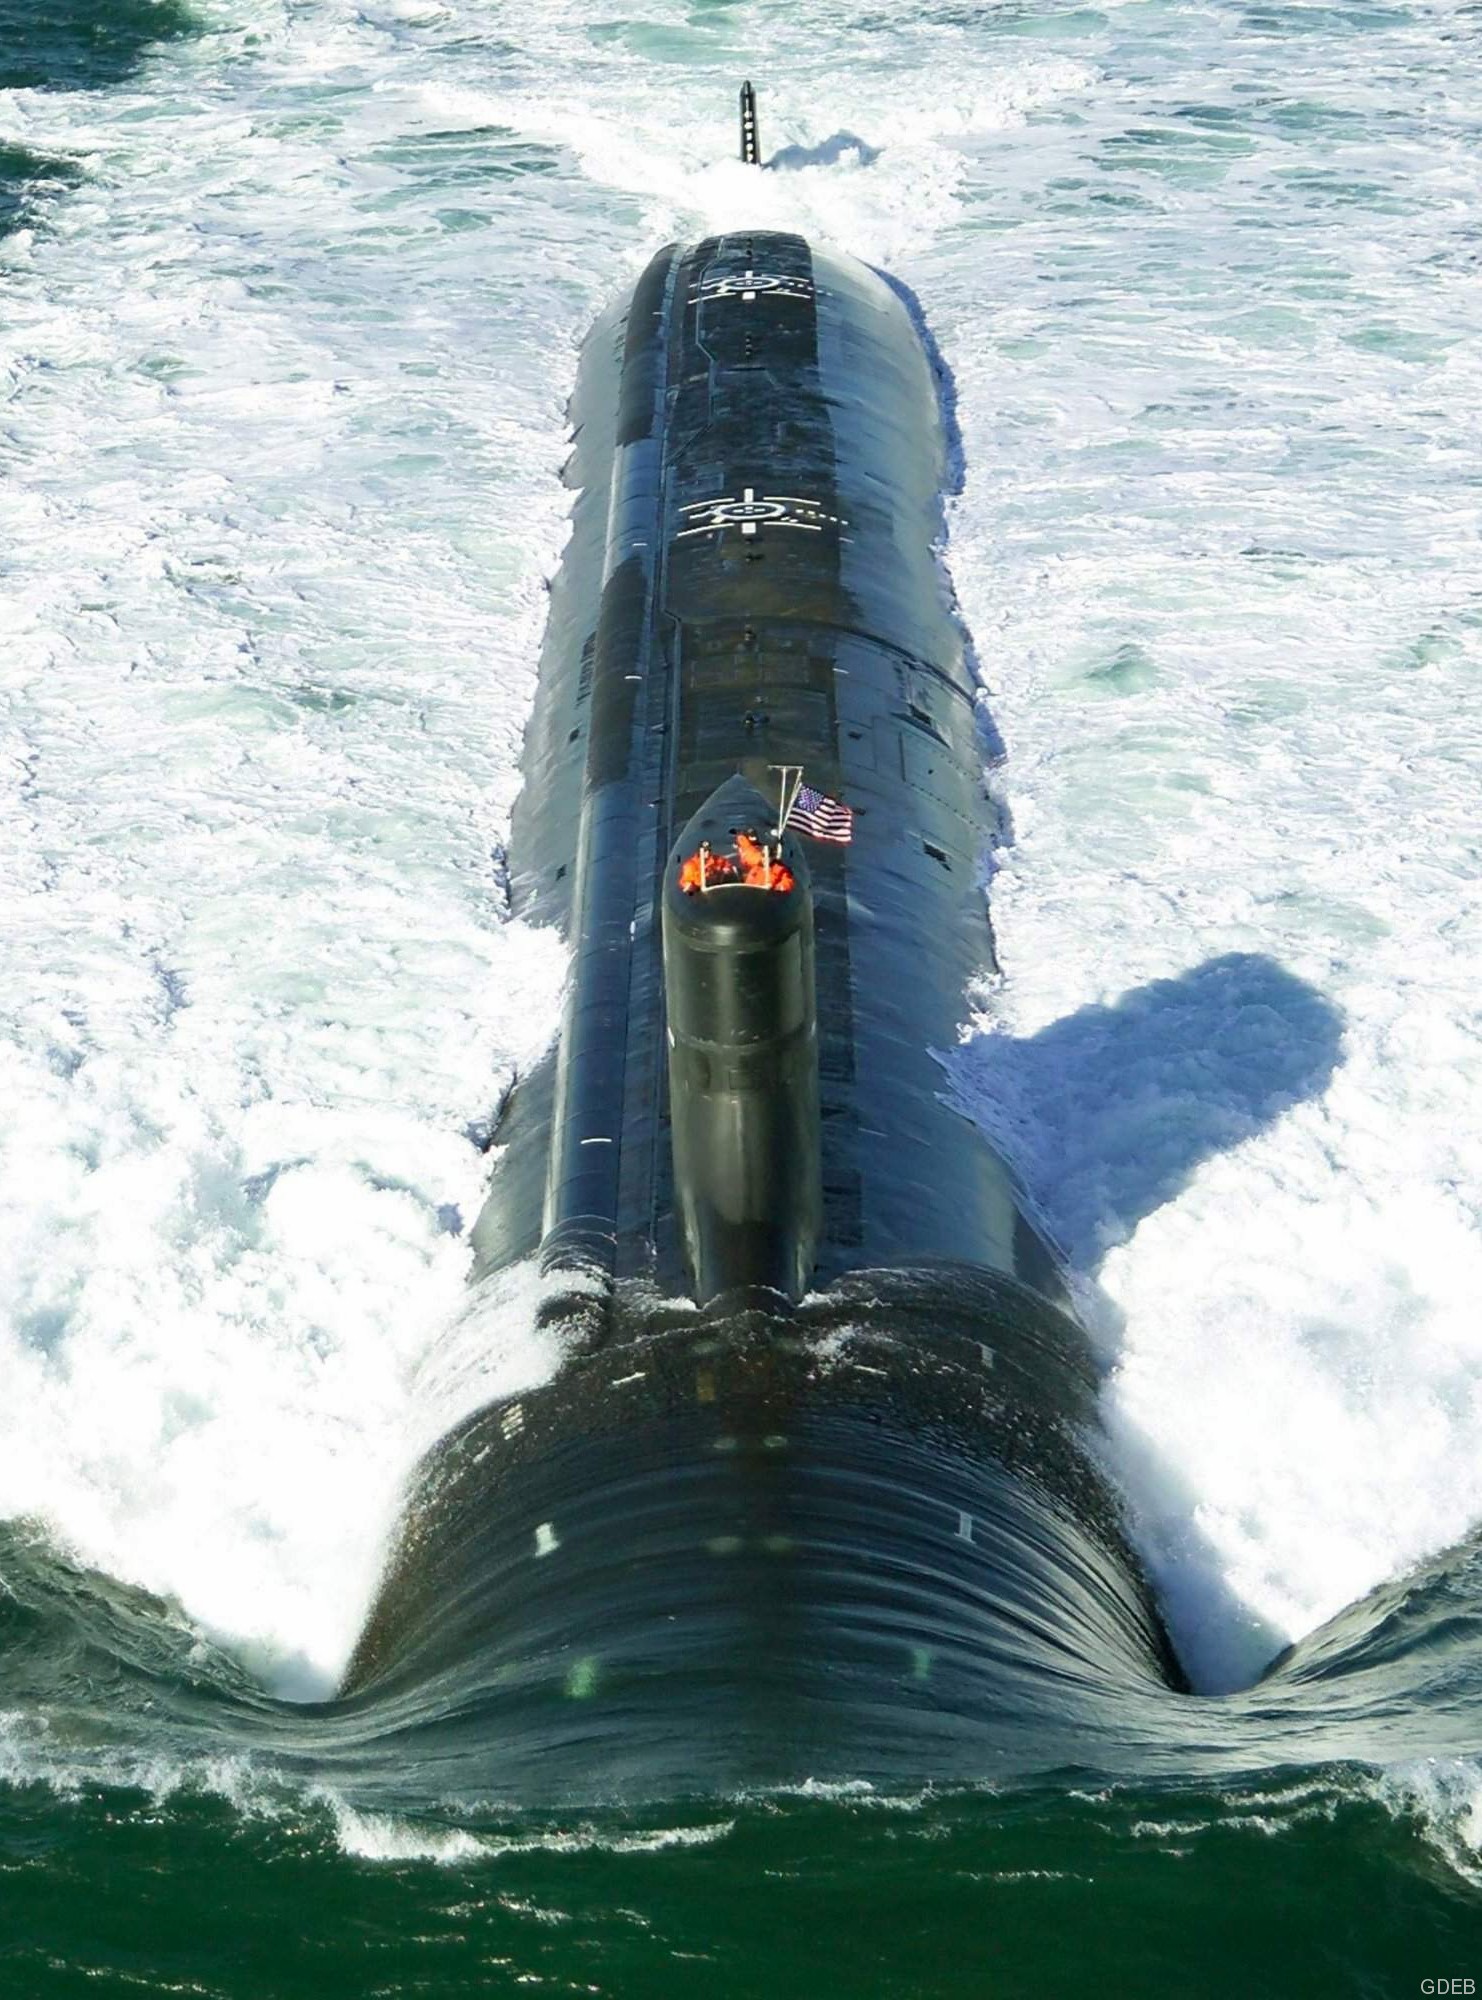 ssn-23 uss jimmy carter seawolf class attack submarine us navy trials general dynamics electric boat 12